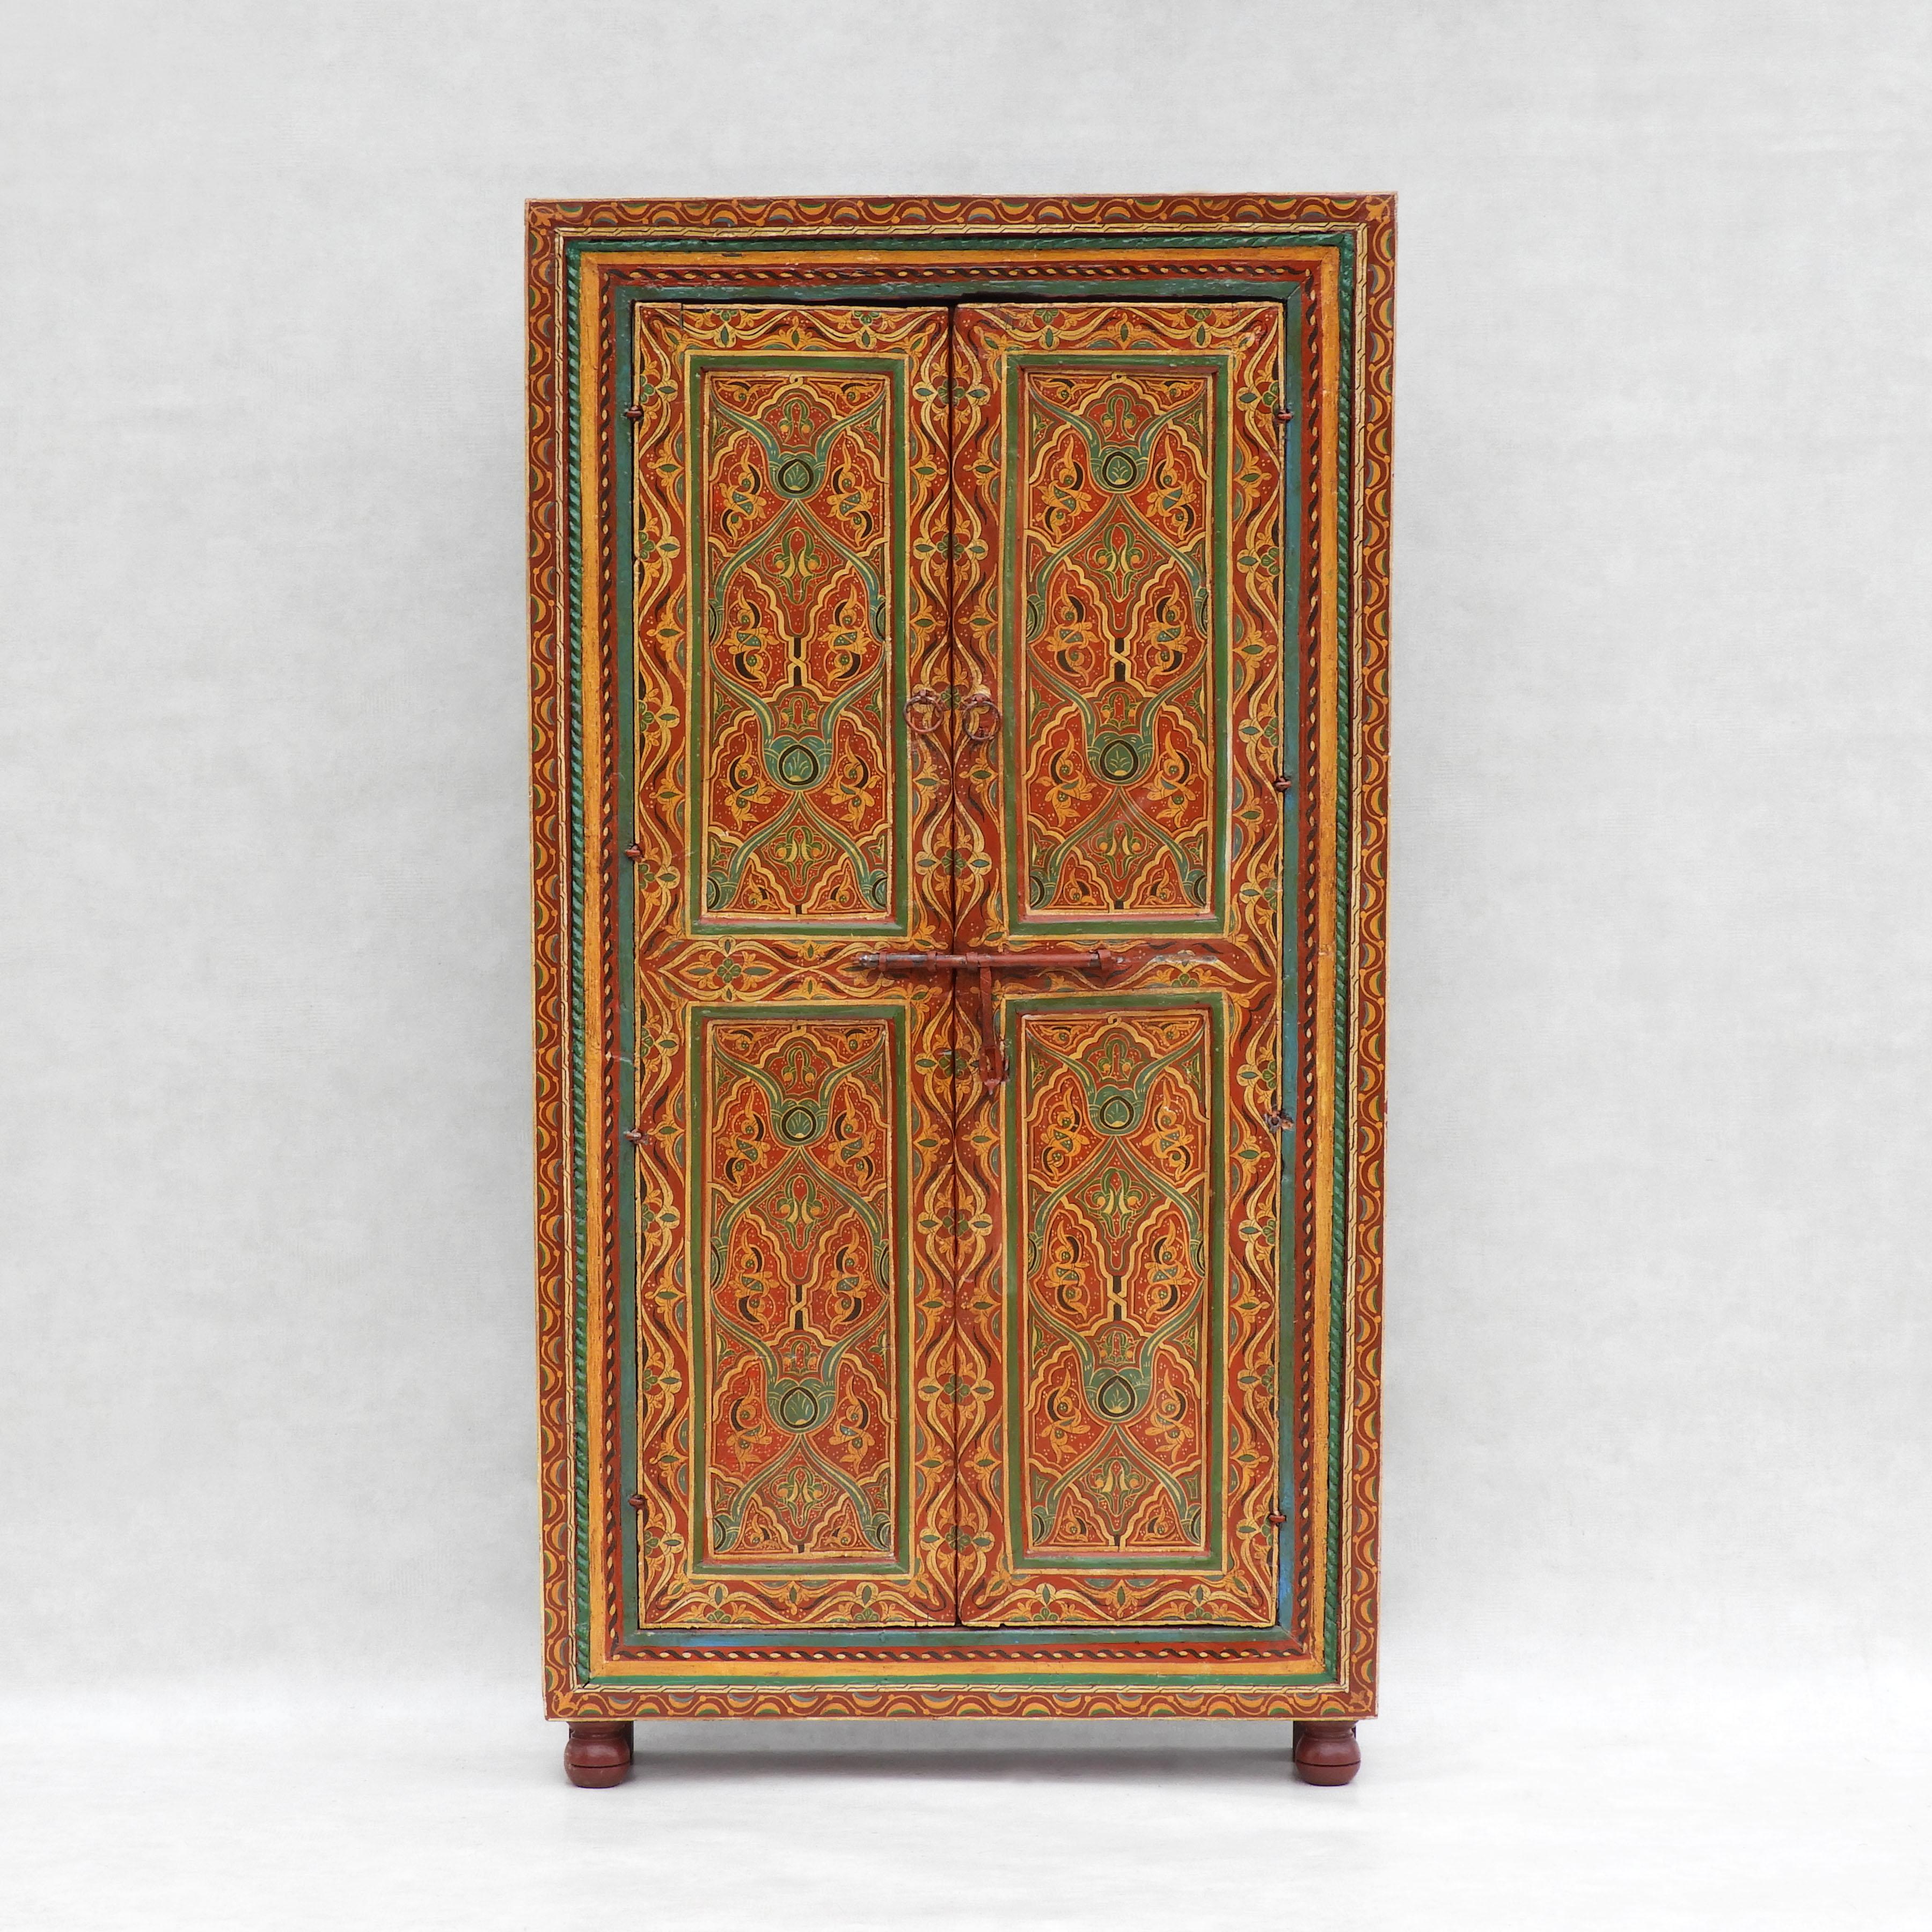 One of a kind Moroccan open backed cupboard.  Beautiful, vibrant, hand painted double doored cabinet in great antique condition. A fabulous original piece that can be wall mounted and used 'as is' or adapted to fit your personal requirements. A